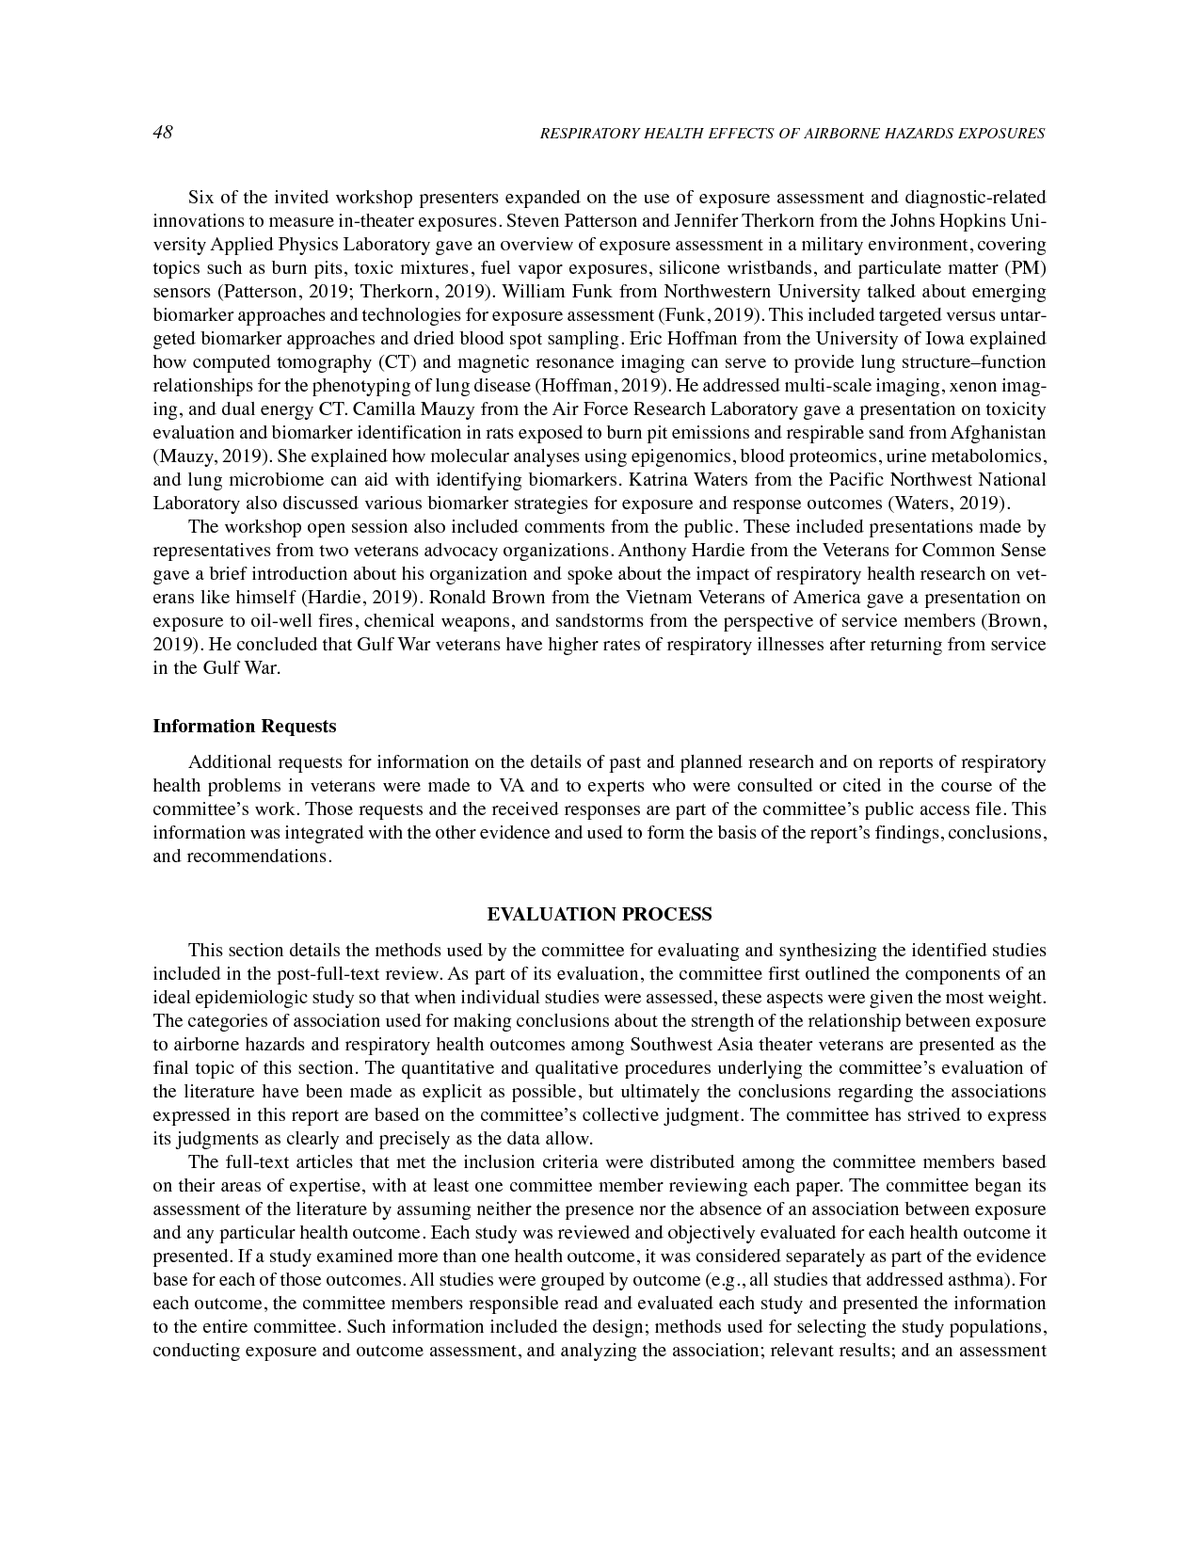 3 Evaluation of the Evidence Base and Background of Major Studies and ...